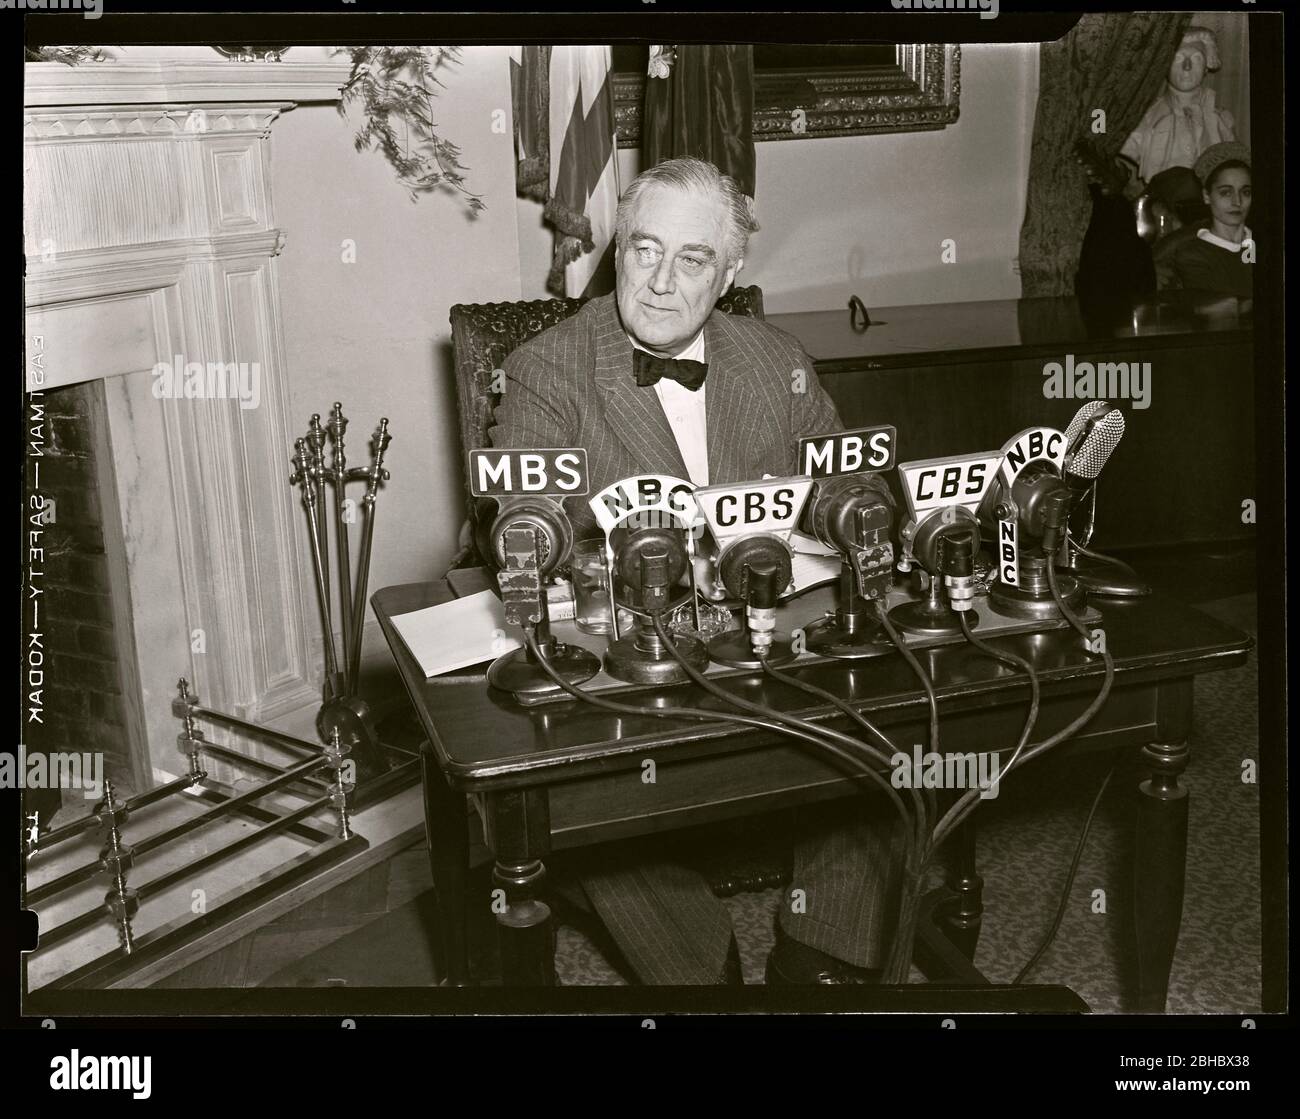 President Franklin D. Roosevelt 'FDR' at news microphones gives fireside radio address just after two days the attack on Pearl Harbor, 1941. Image from 4x5 inch negative. Stock Photo